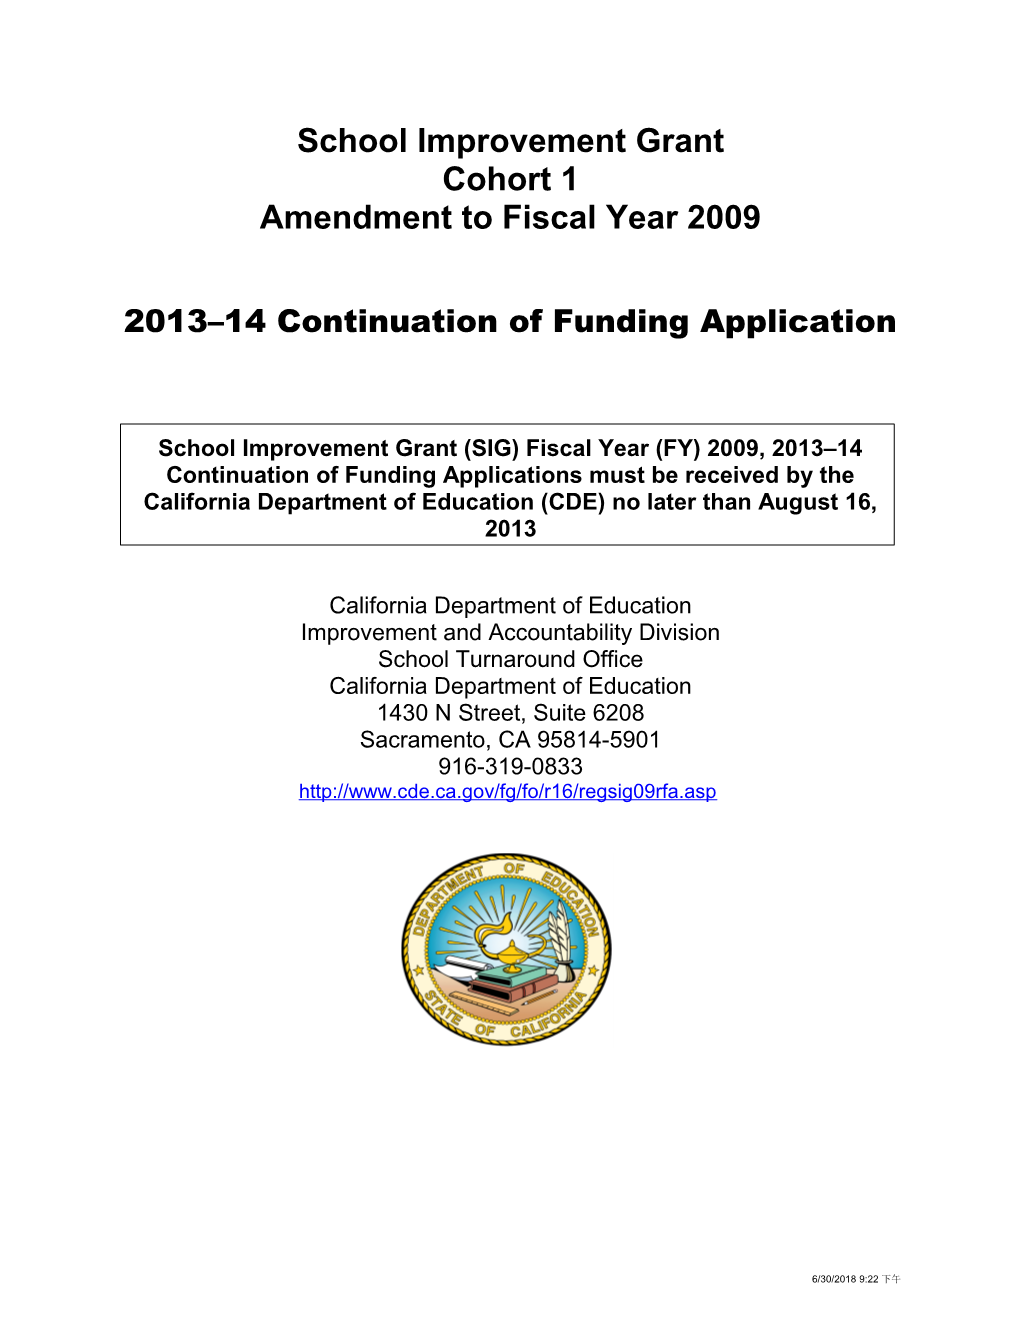 2013-14 Continuation Application - Title I (CA Dept of Education)